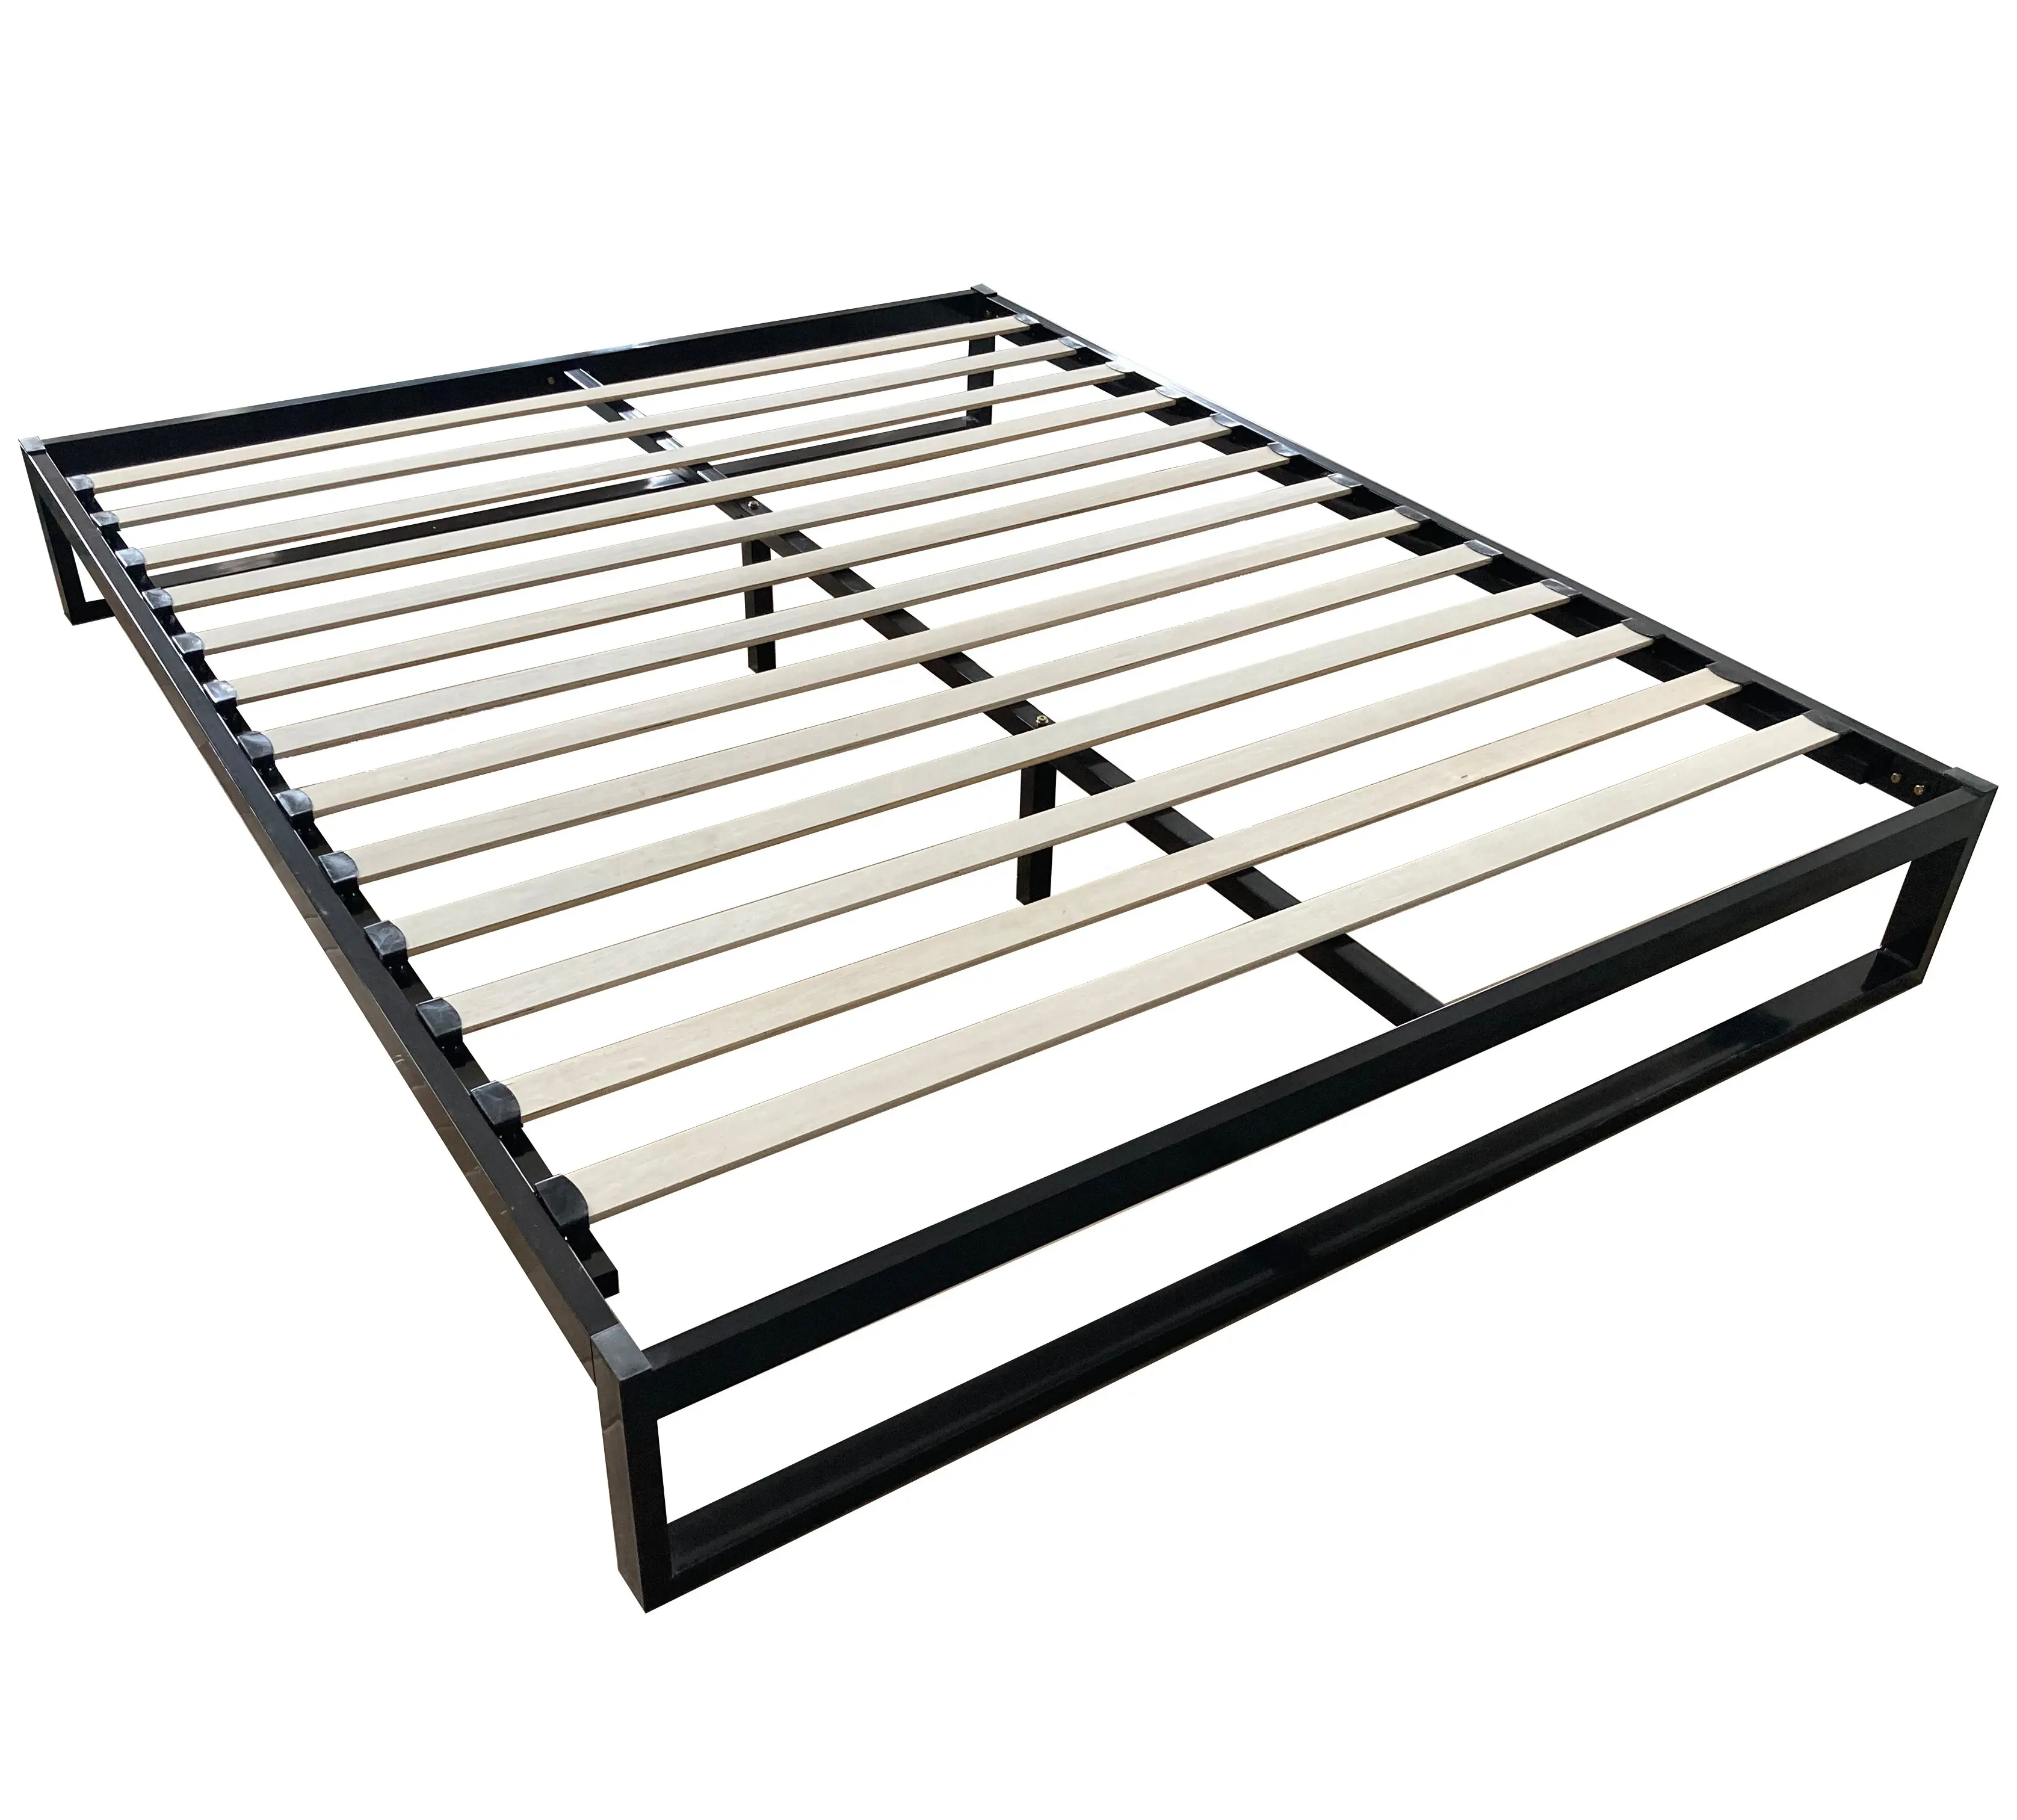 Classic Full Platform Reinforced Heavy Iron Wood Bed